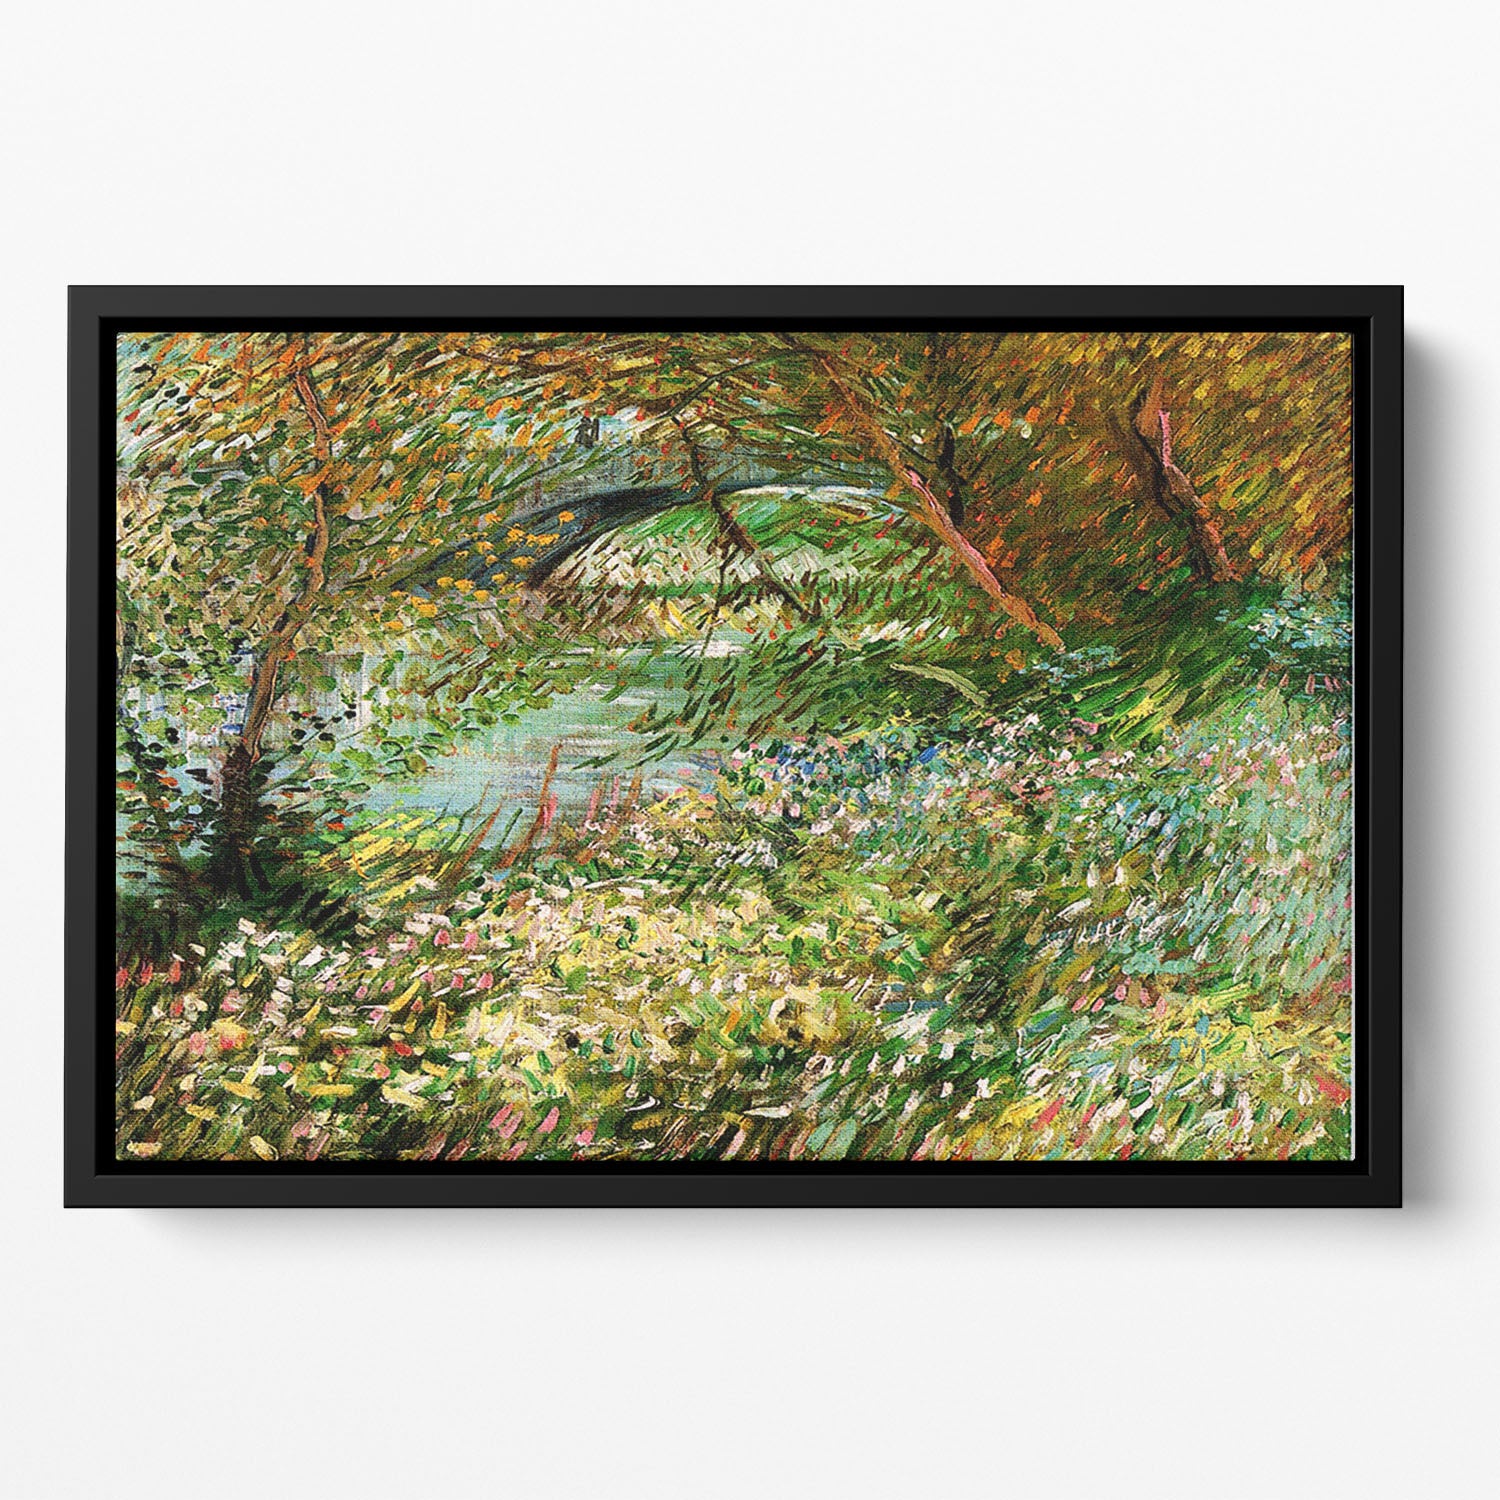 Banks of the Seine with Pont de Clichy in the Spring by Van Gogh Floating Framed Canvas